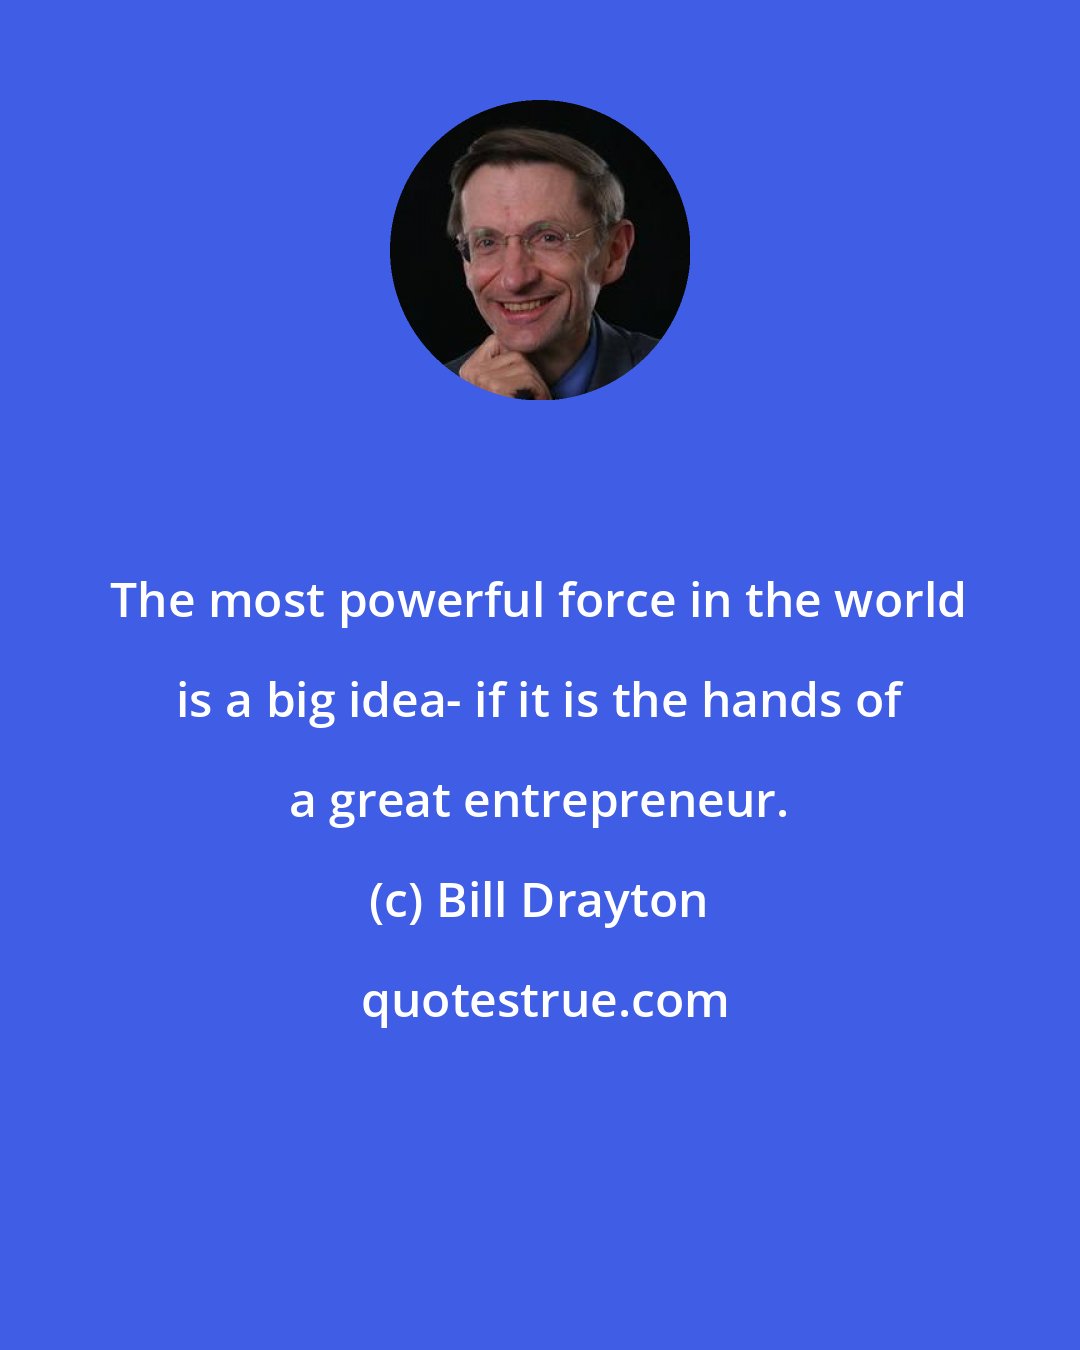 Bill Drayton: The most powerful force in the world is a big idea- if it is the hands of a great entrepreneur.